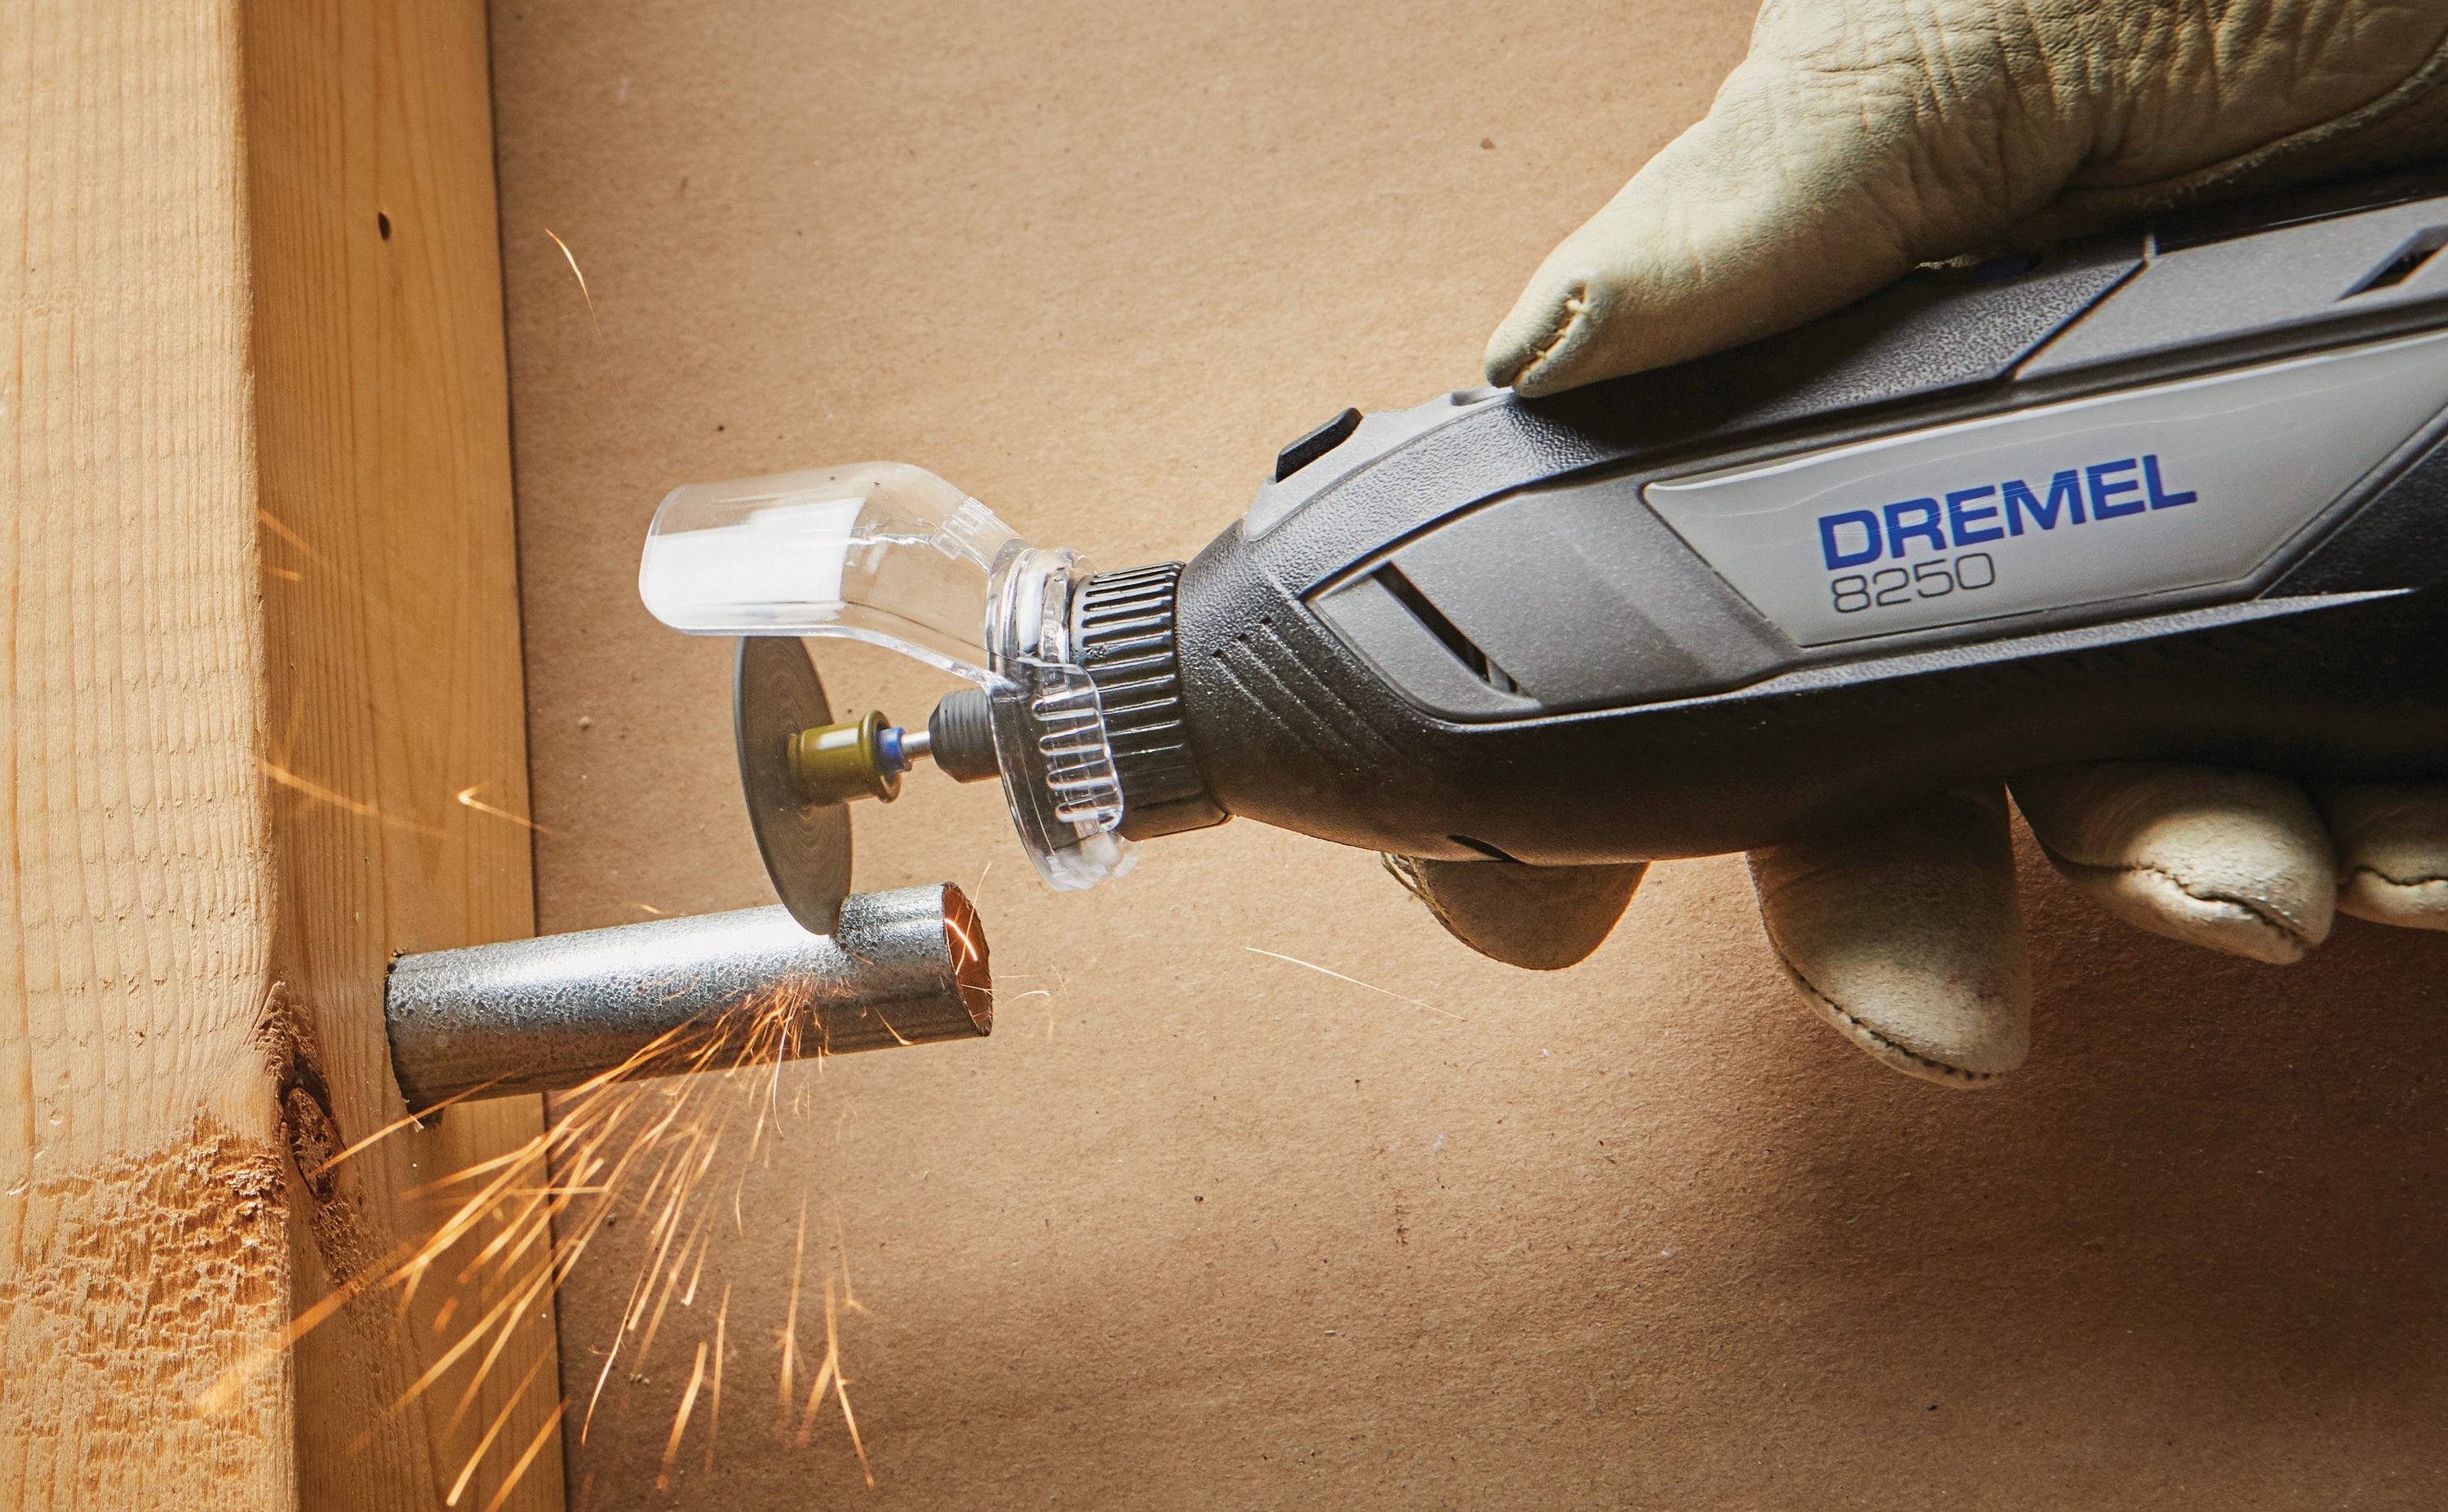 Dremel 4000 vs. 4200: Which Rotary Tool Reigns Supreme? Find Out